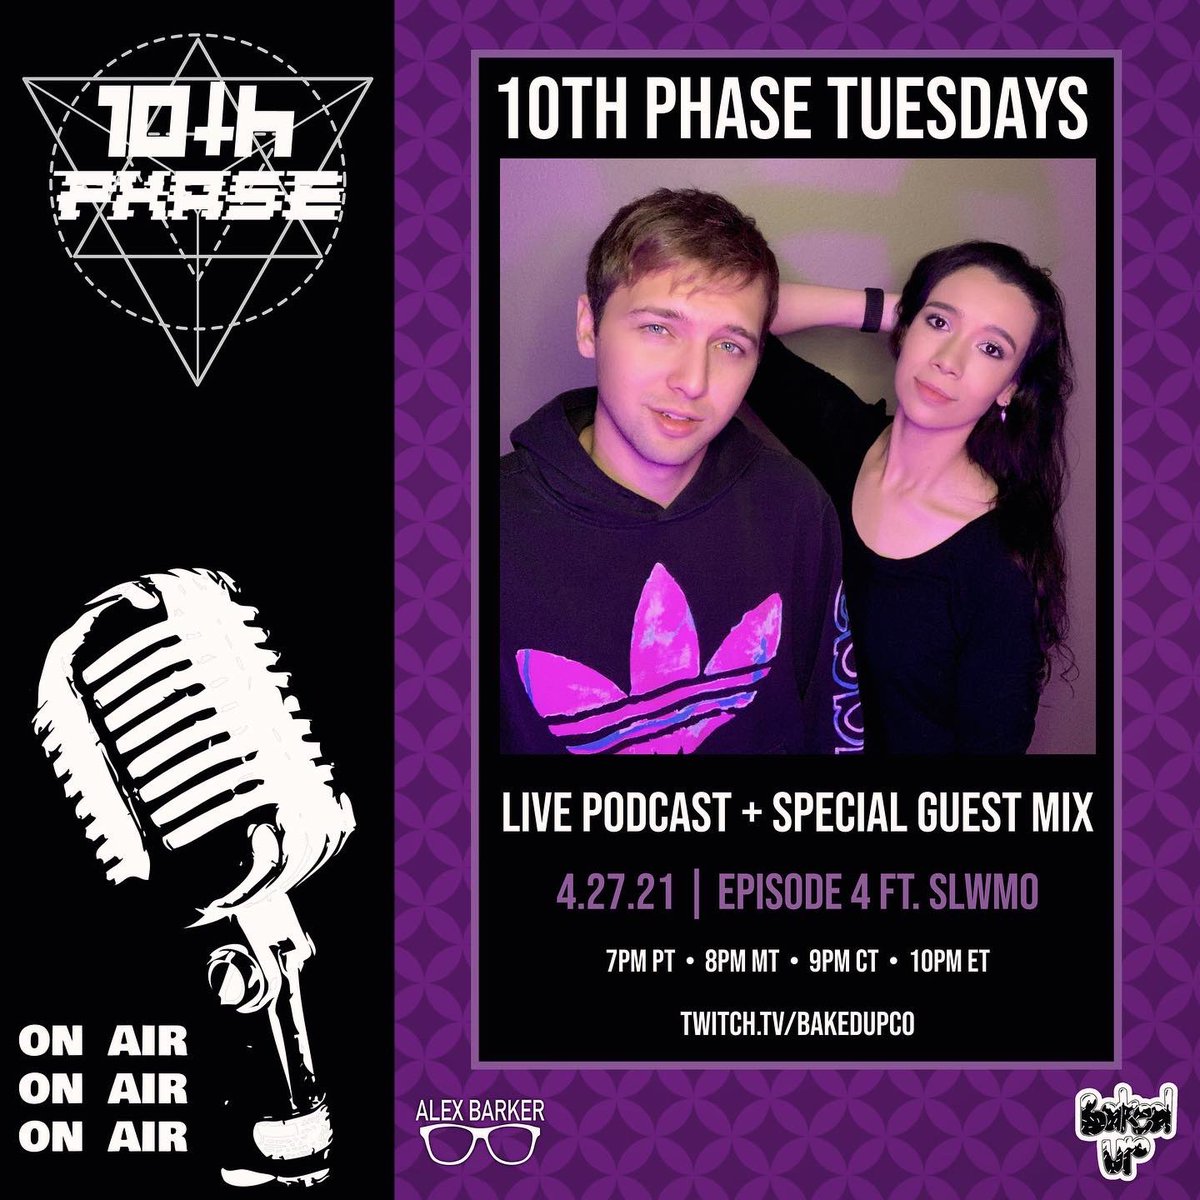 Tuesday 4/27 -  @10thphase Tuesdays (Ep. 4 ft.  @slwmo_sounds) at 8PM MT / 9PM CT  http://twitch.tv/bakedupco  pt.2